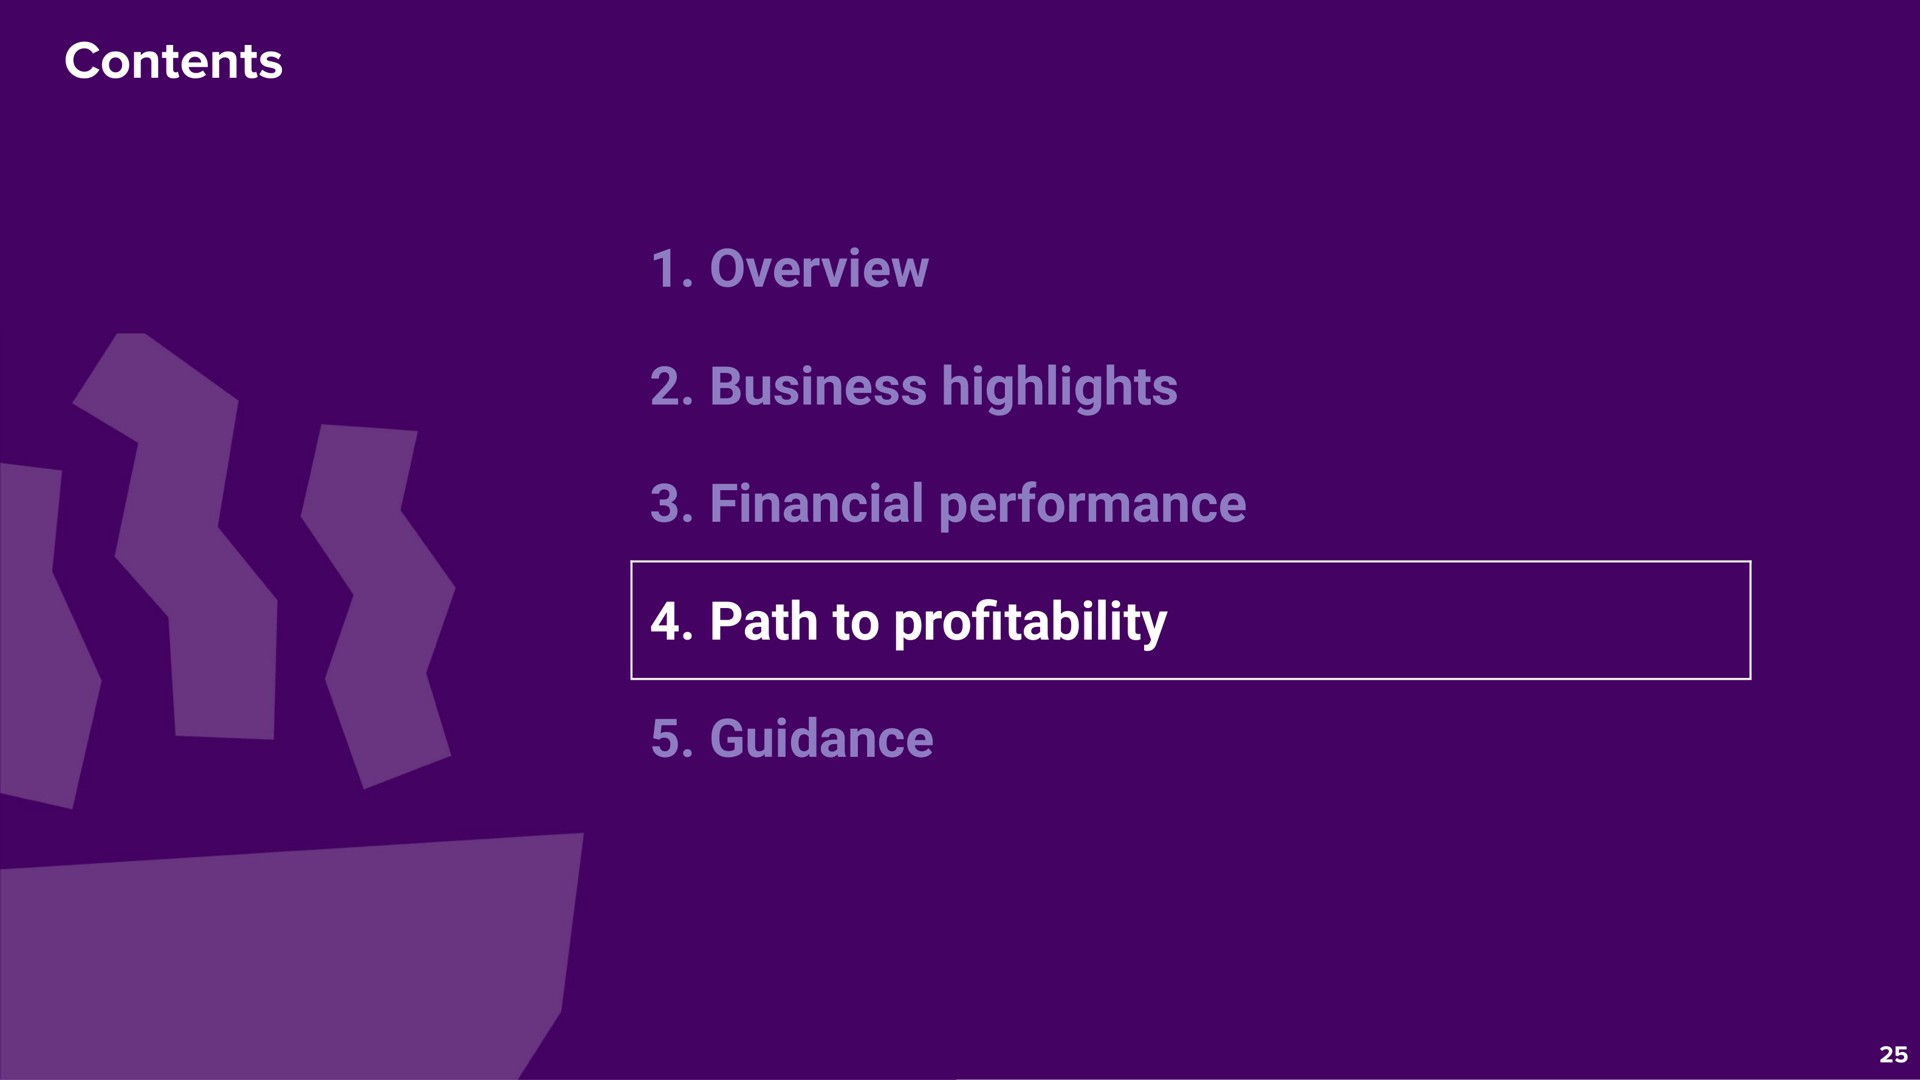 contents overview business highlights financial performance path to pro guidance profitability | Deliveroo